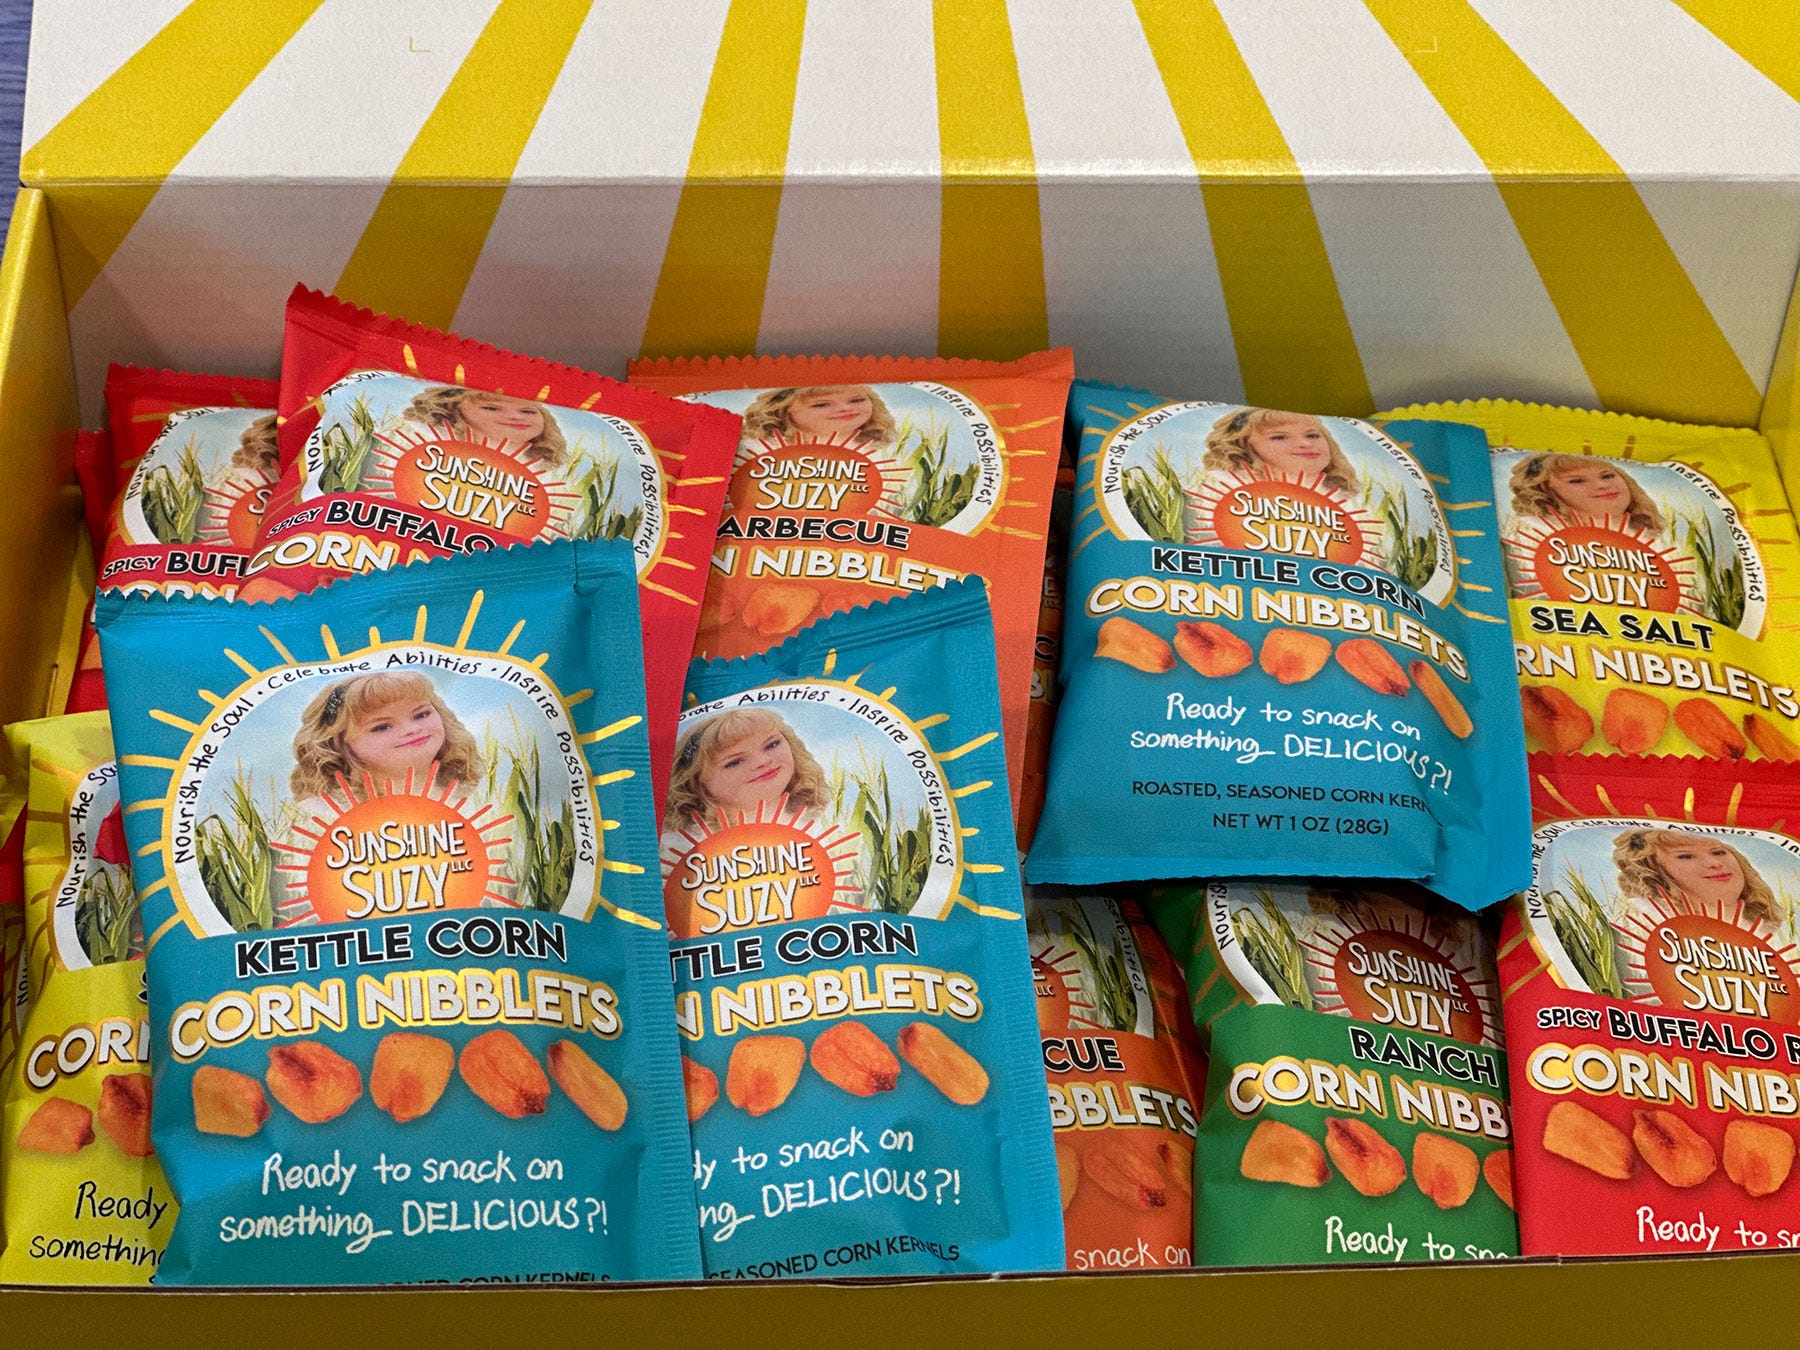 Individual bags of Sunshine Suzy corn nibblets packaged in a box